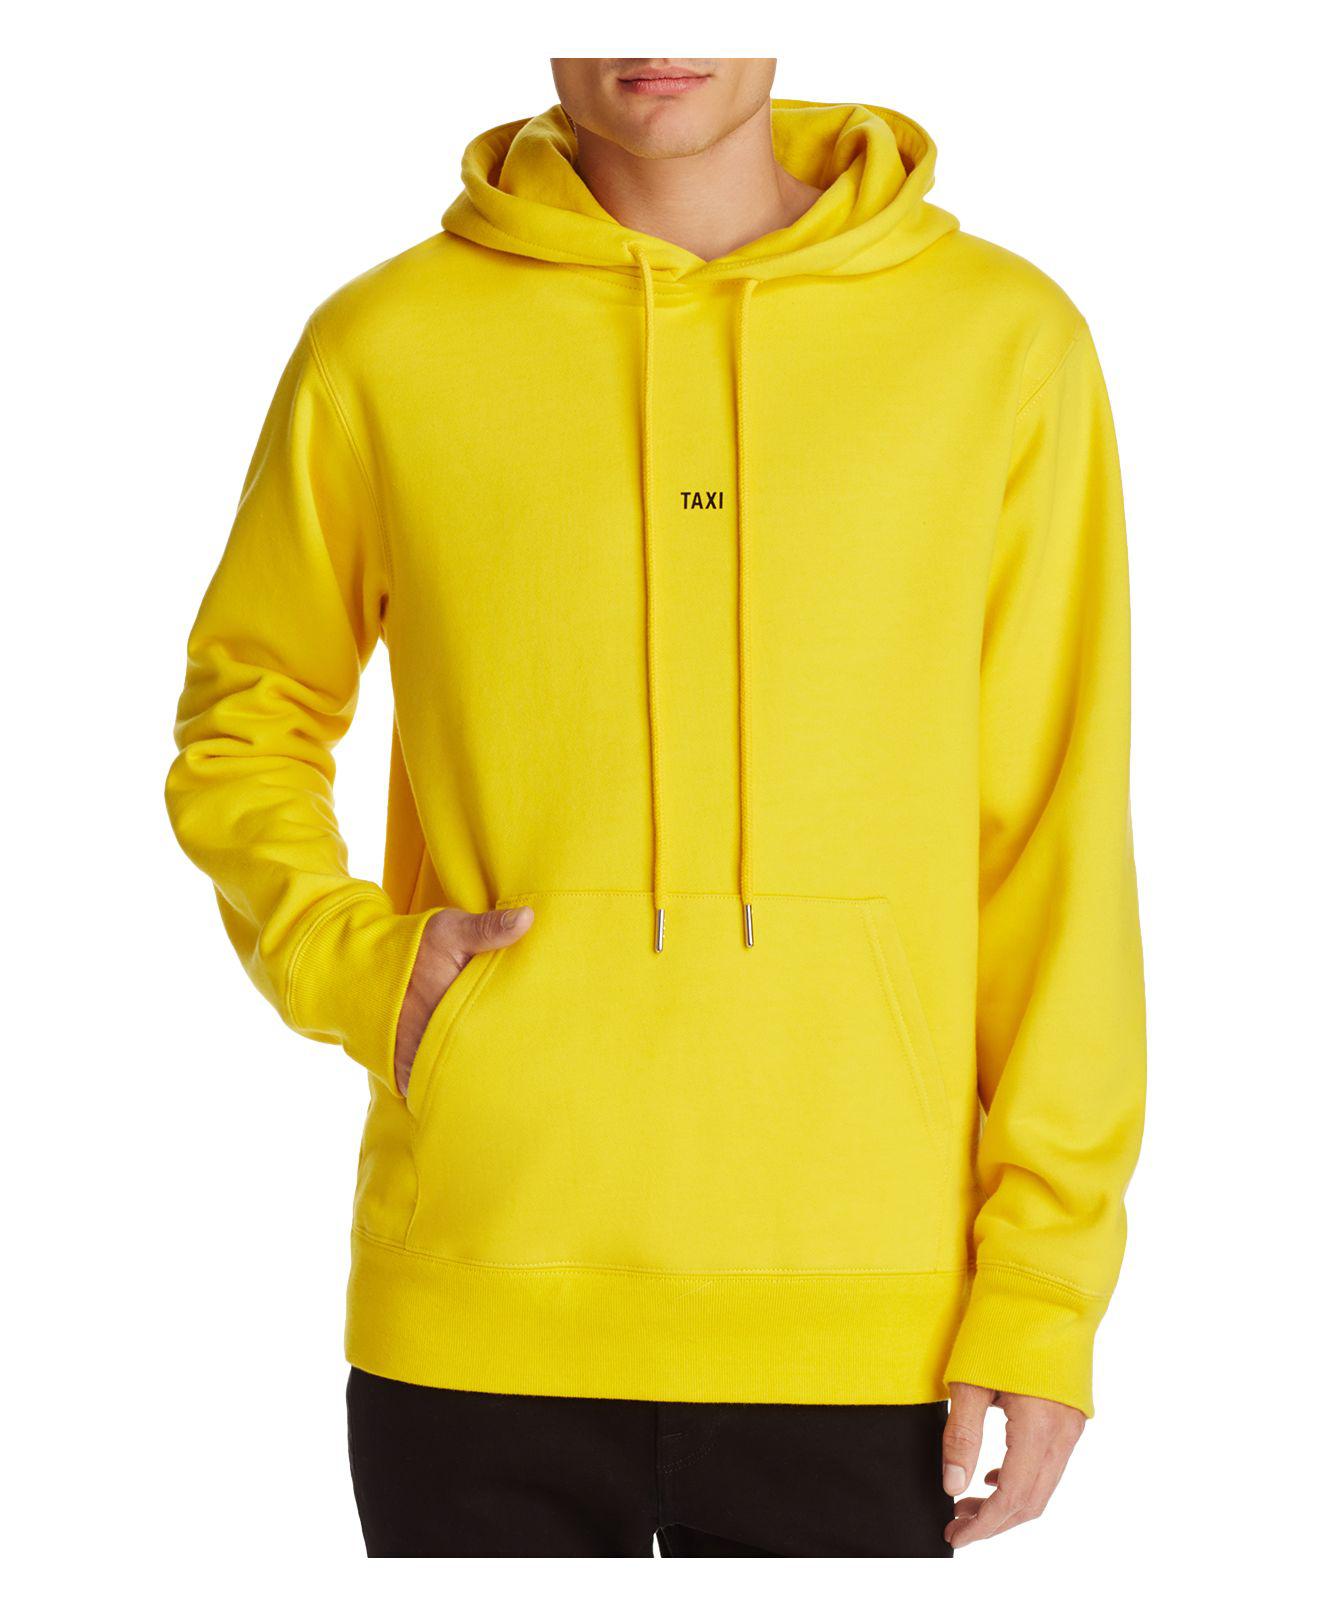 Helmut Lang Taxi Hooded Sweatshirt in Yellow for Men - Lyst